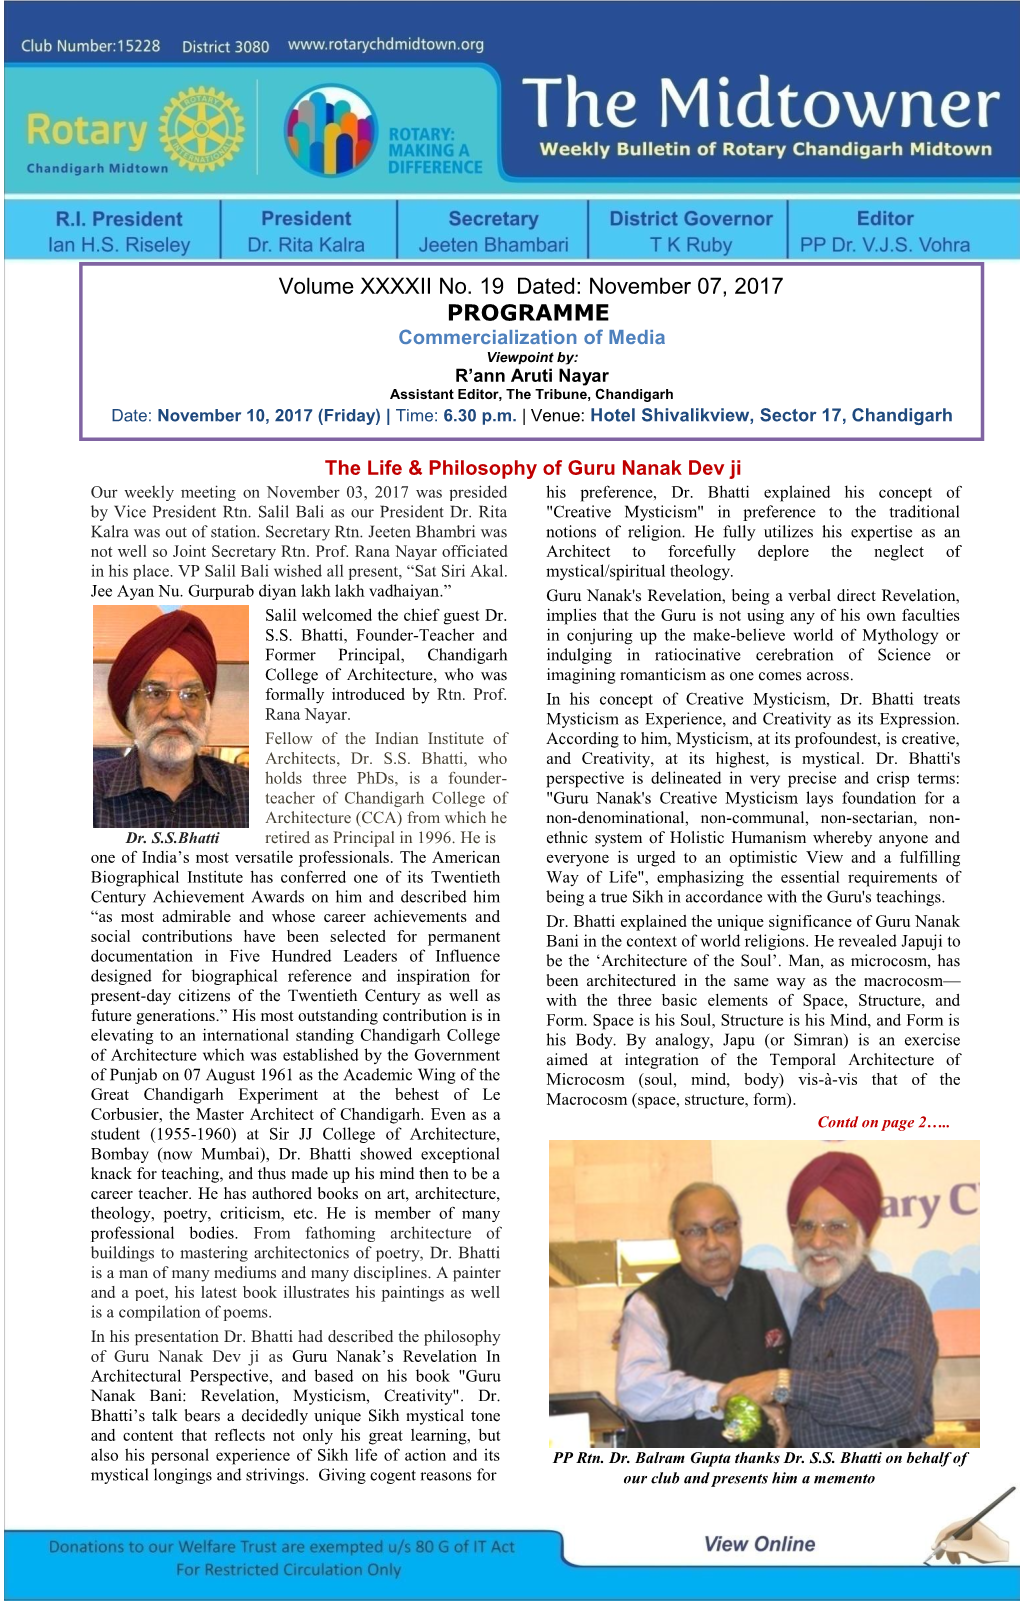 Volume XXXXII No. 19 Dated: November 07, 2017 PROGRAMME Commercialization of Media Viewpoint By: R’Ann Aruti Nayar Assistant Editor, the Tribune, Chandigarh